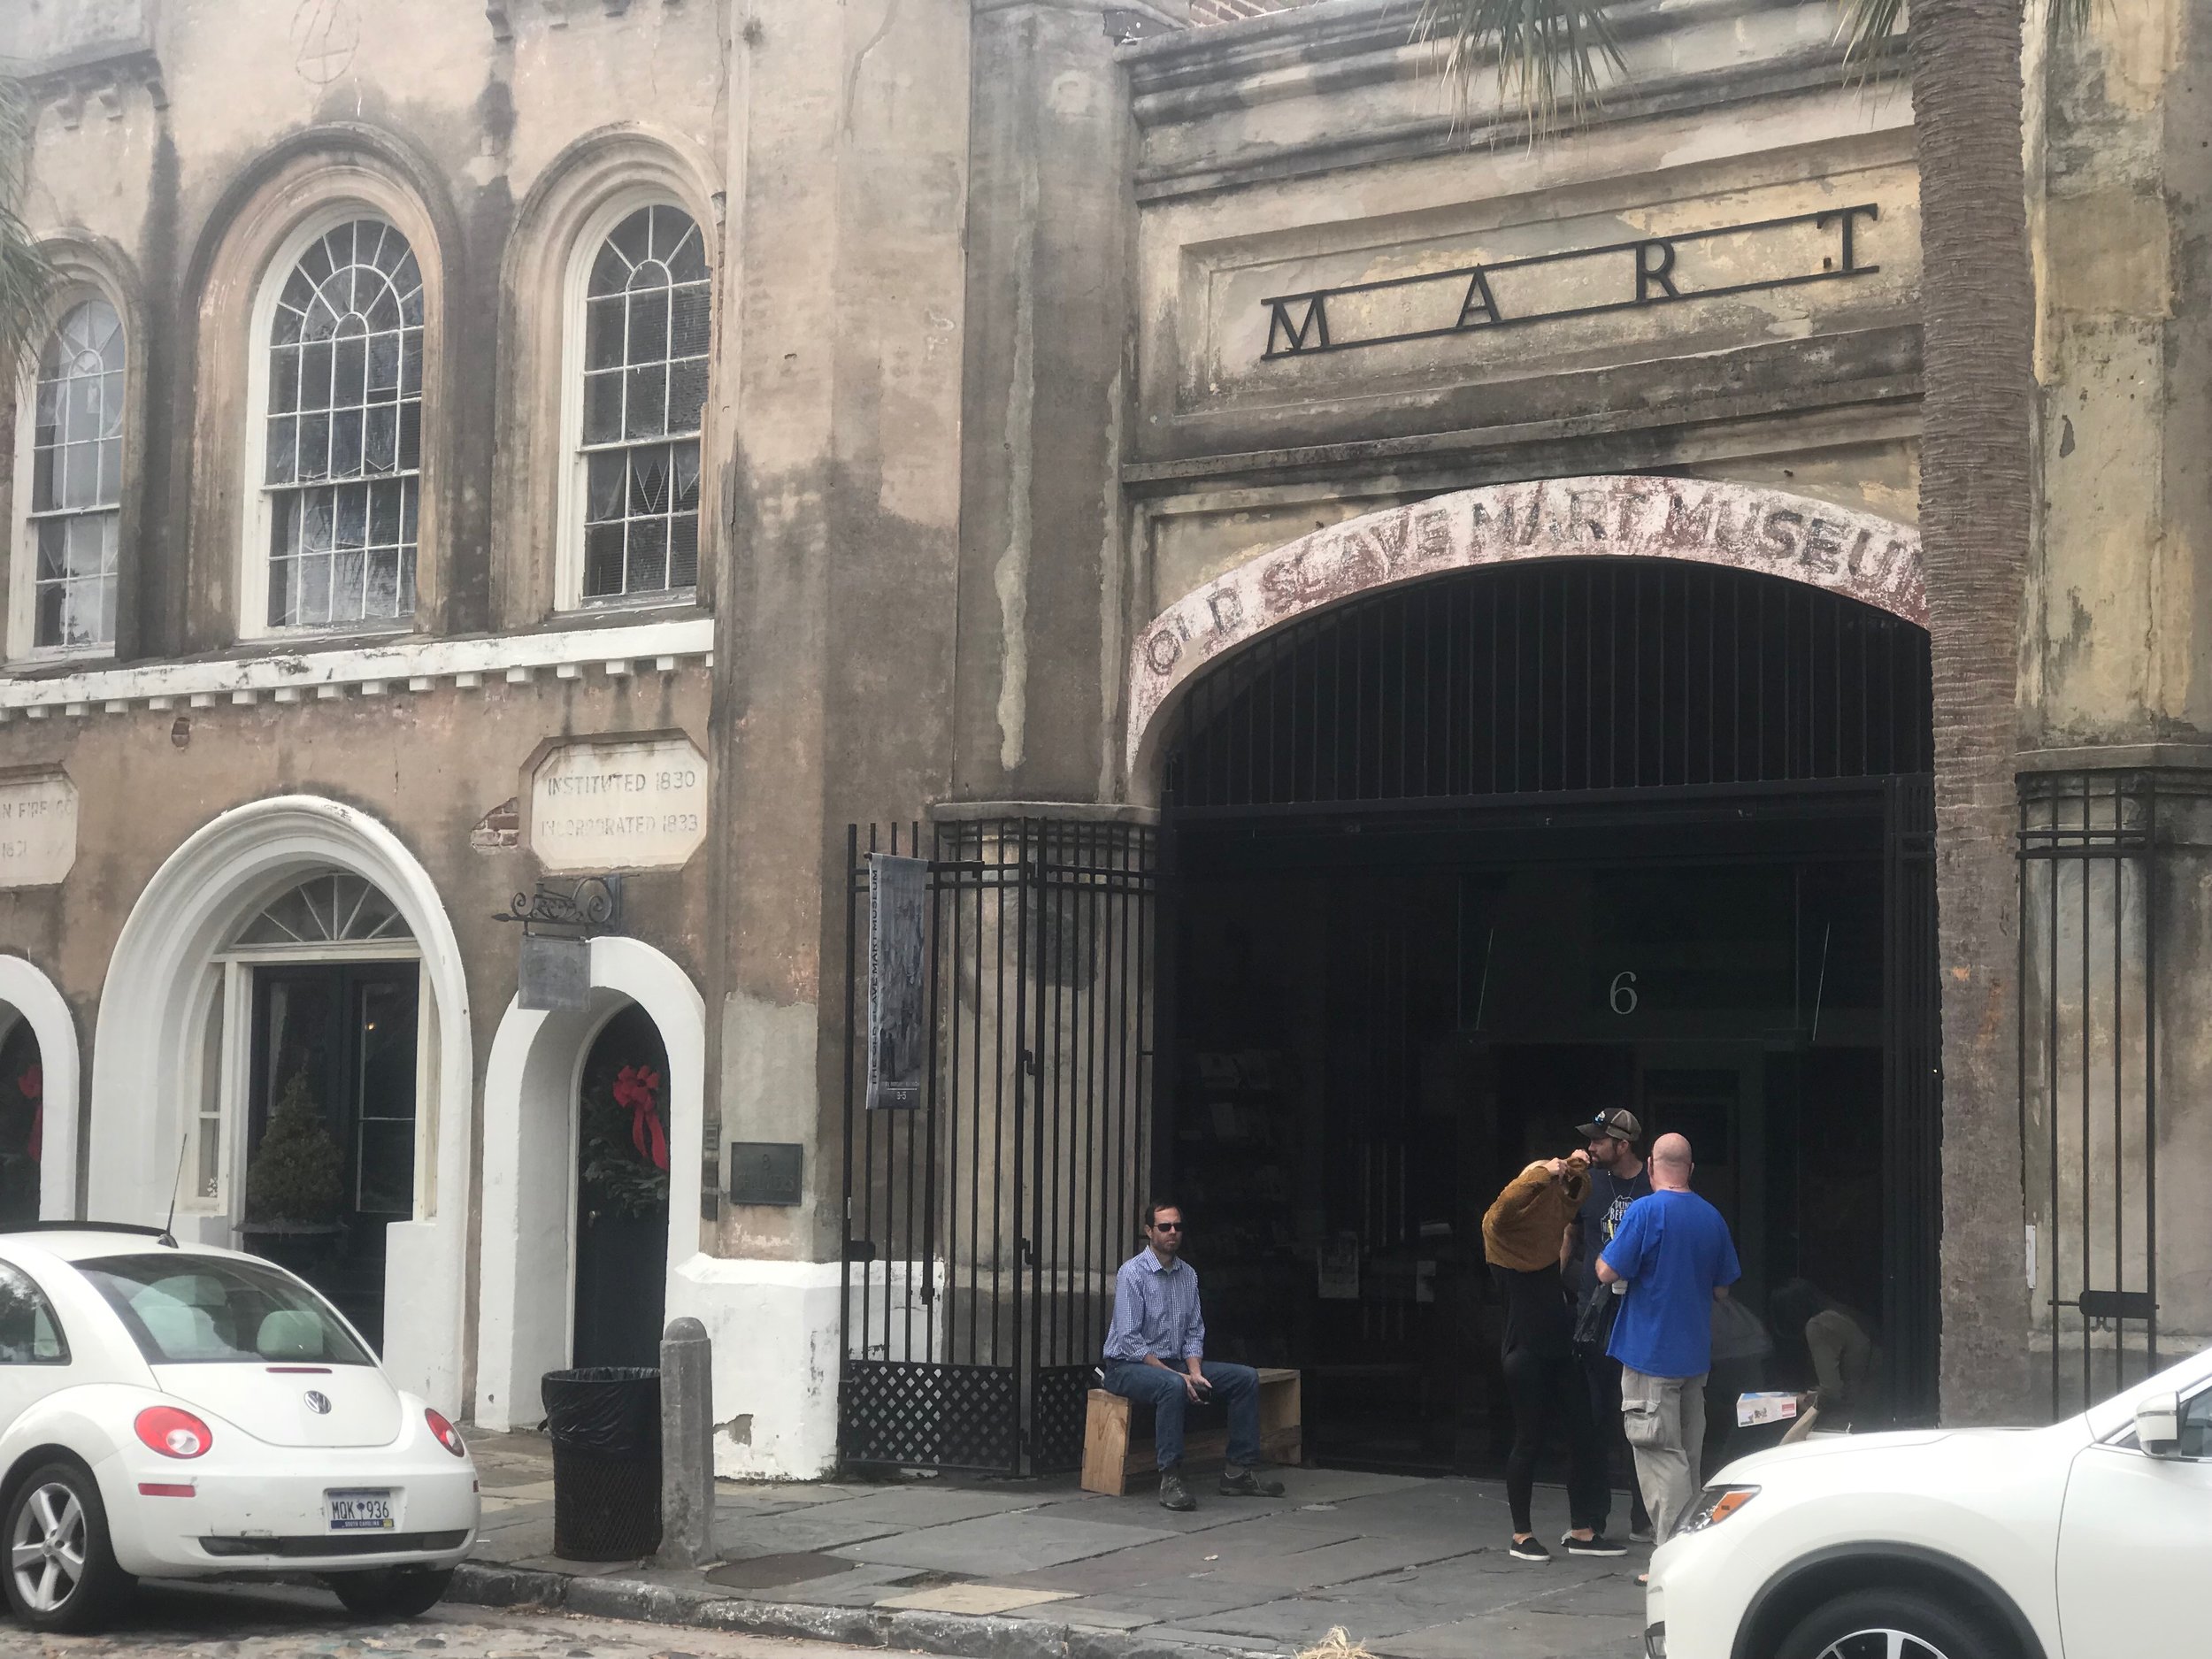  Charleston, SC: The city's largest slave market is now a museum run by Charleston's city government. 